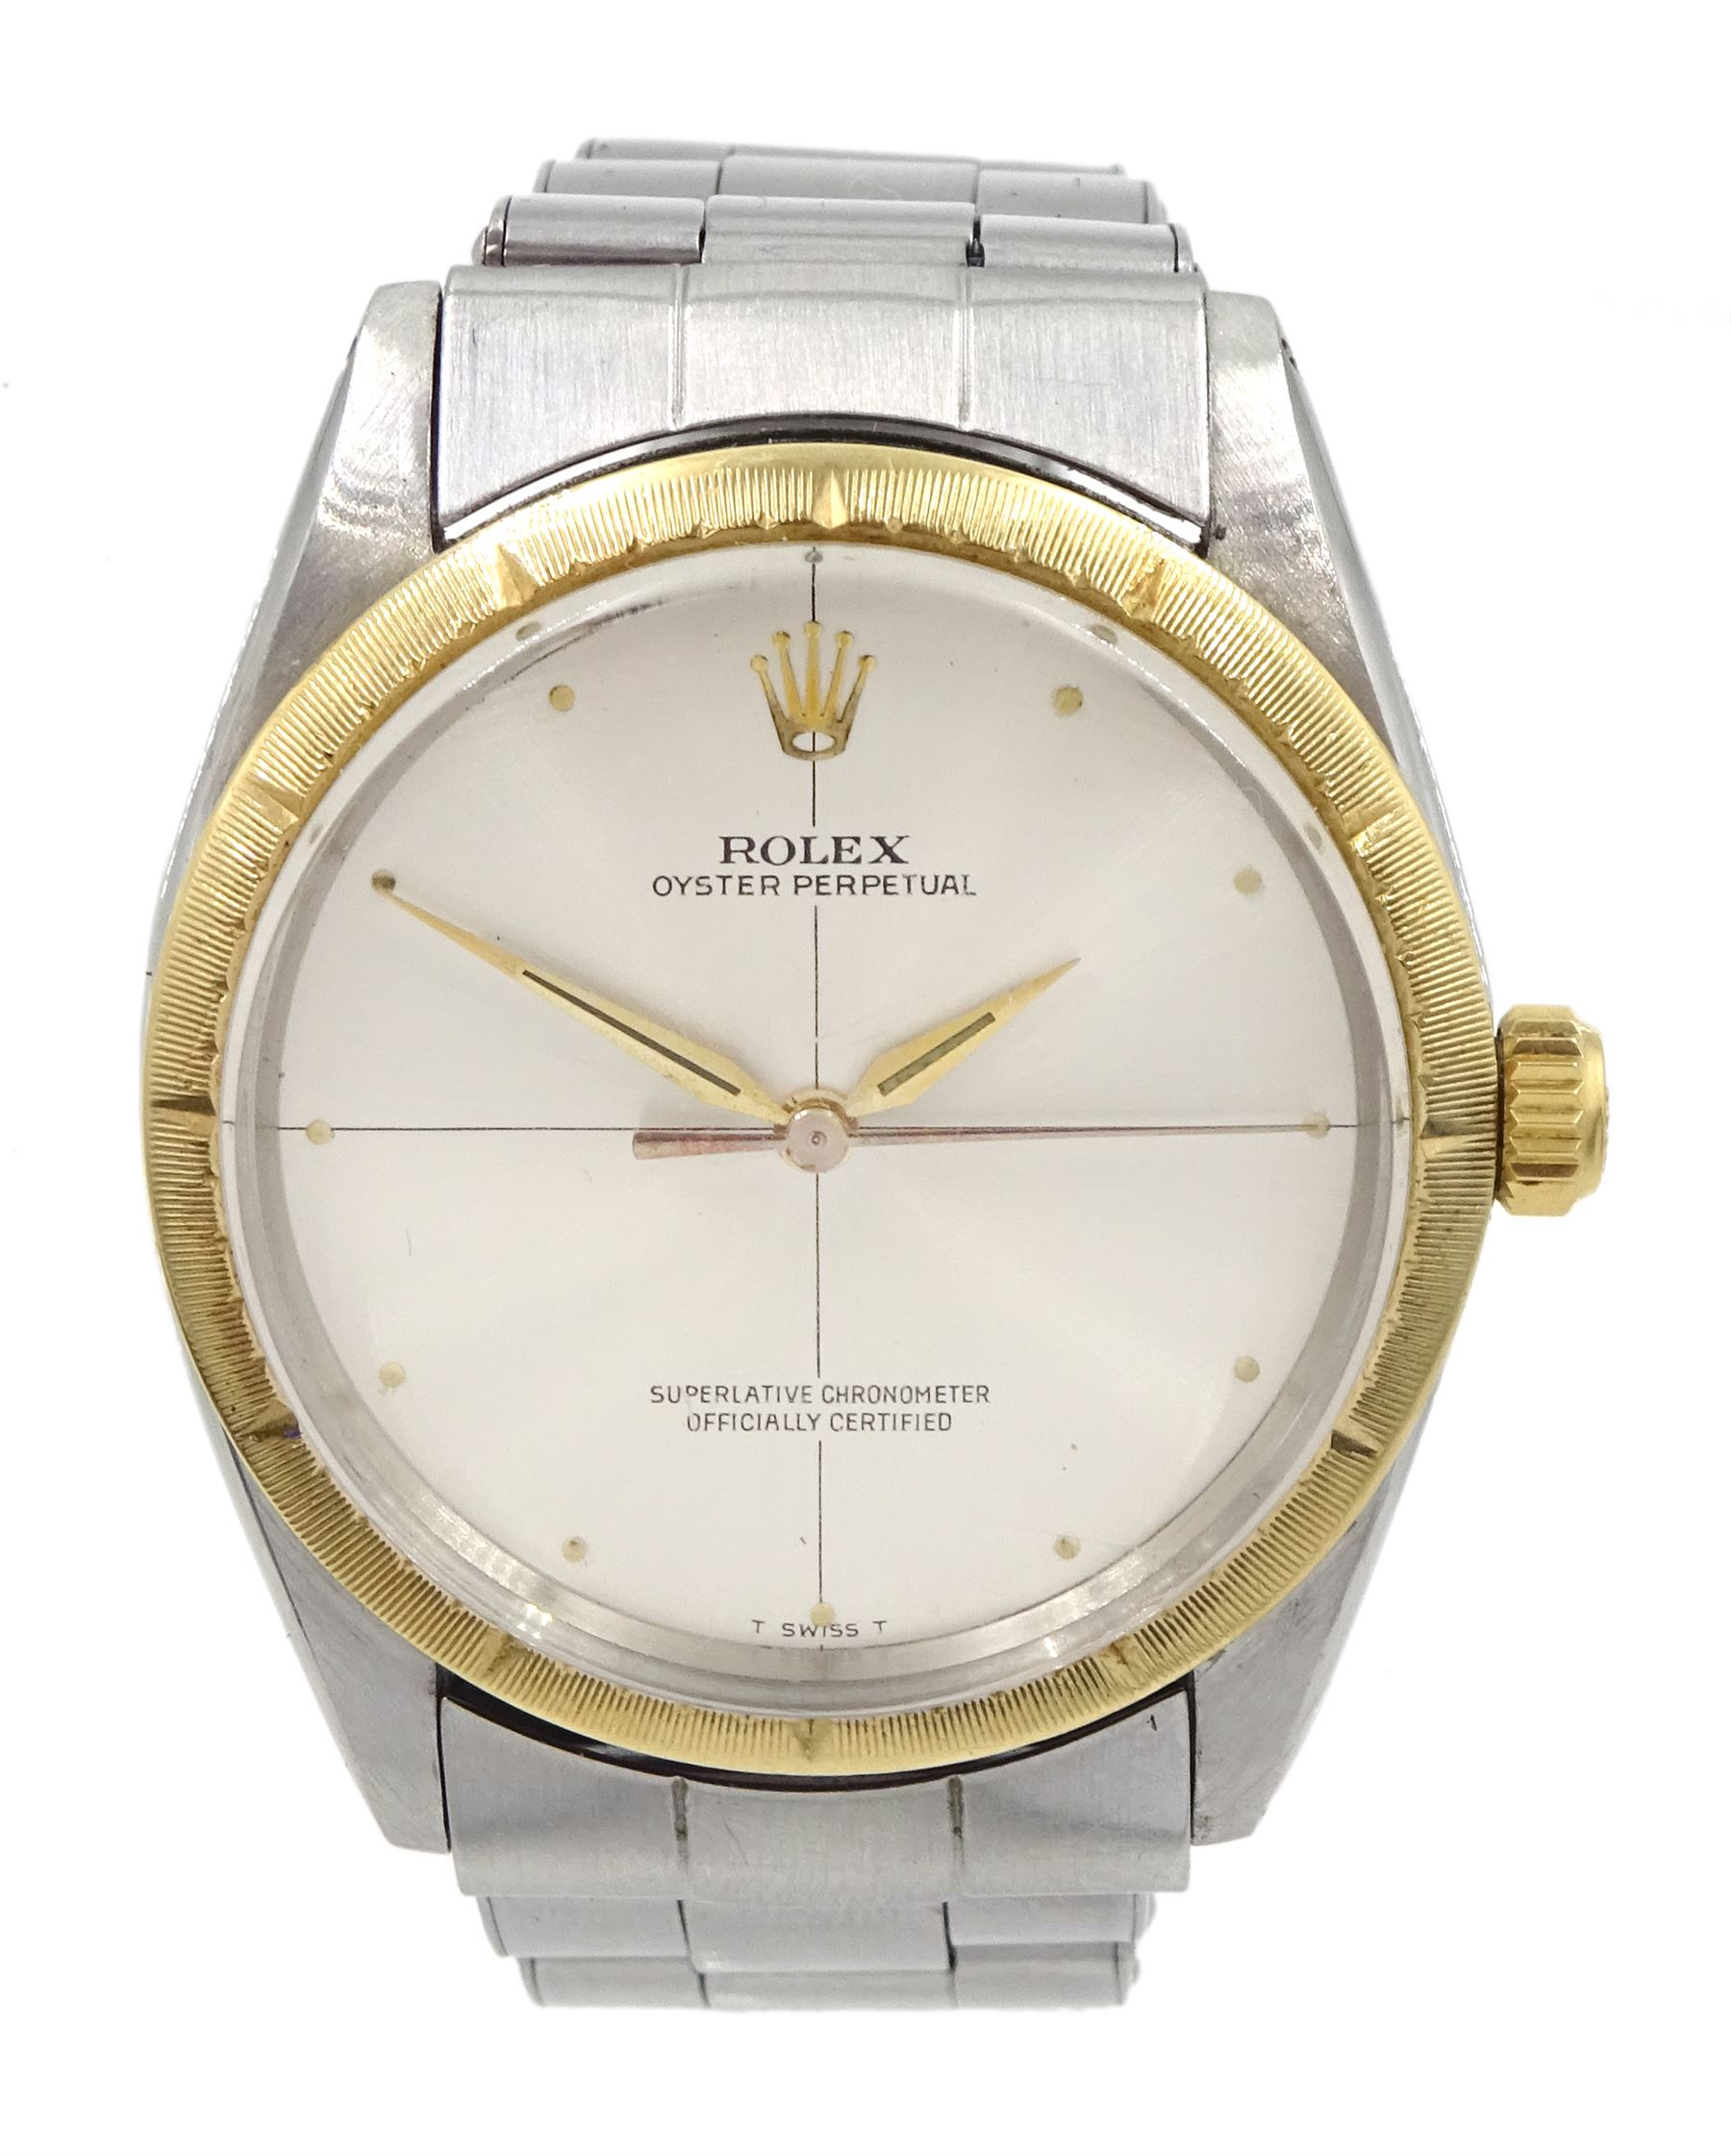 Rolex Oyster Perpetual Zephyr gentleman's gold and stainless steel wristwatch